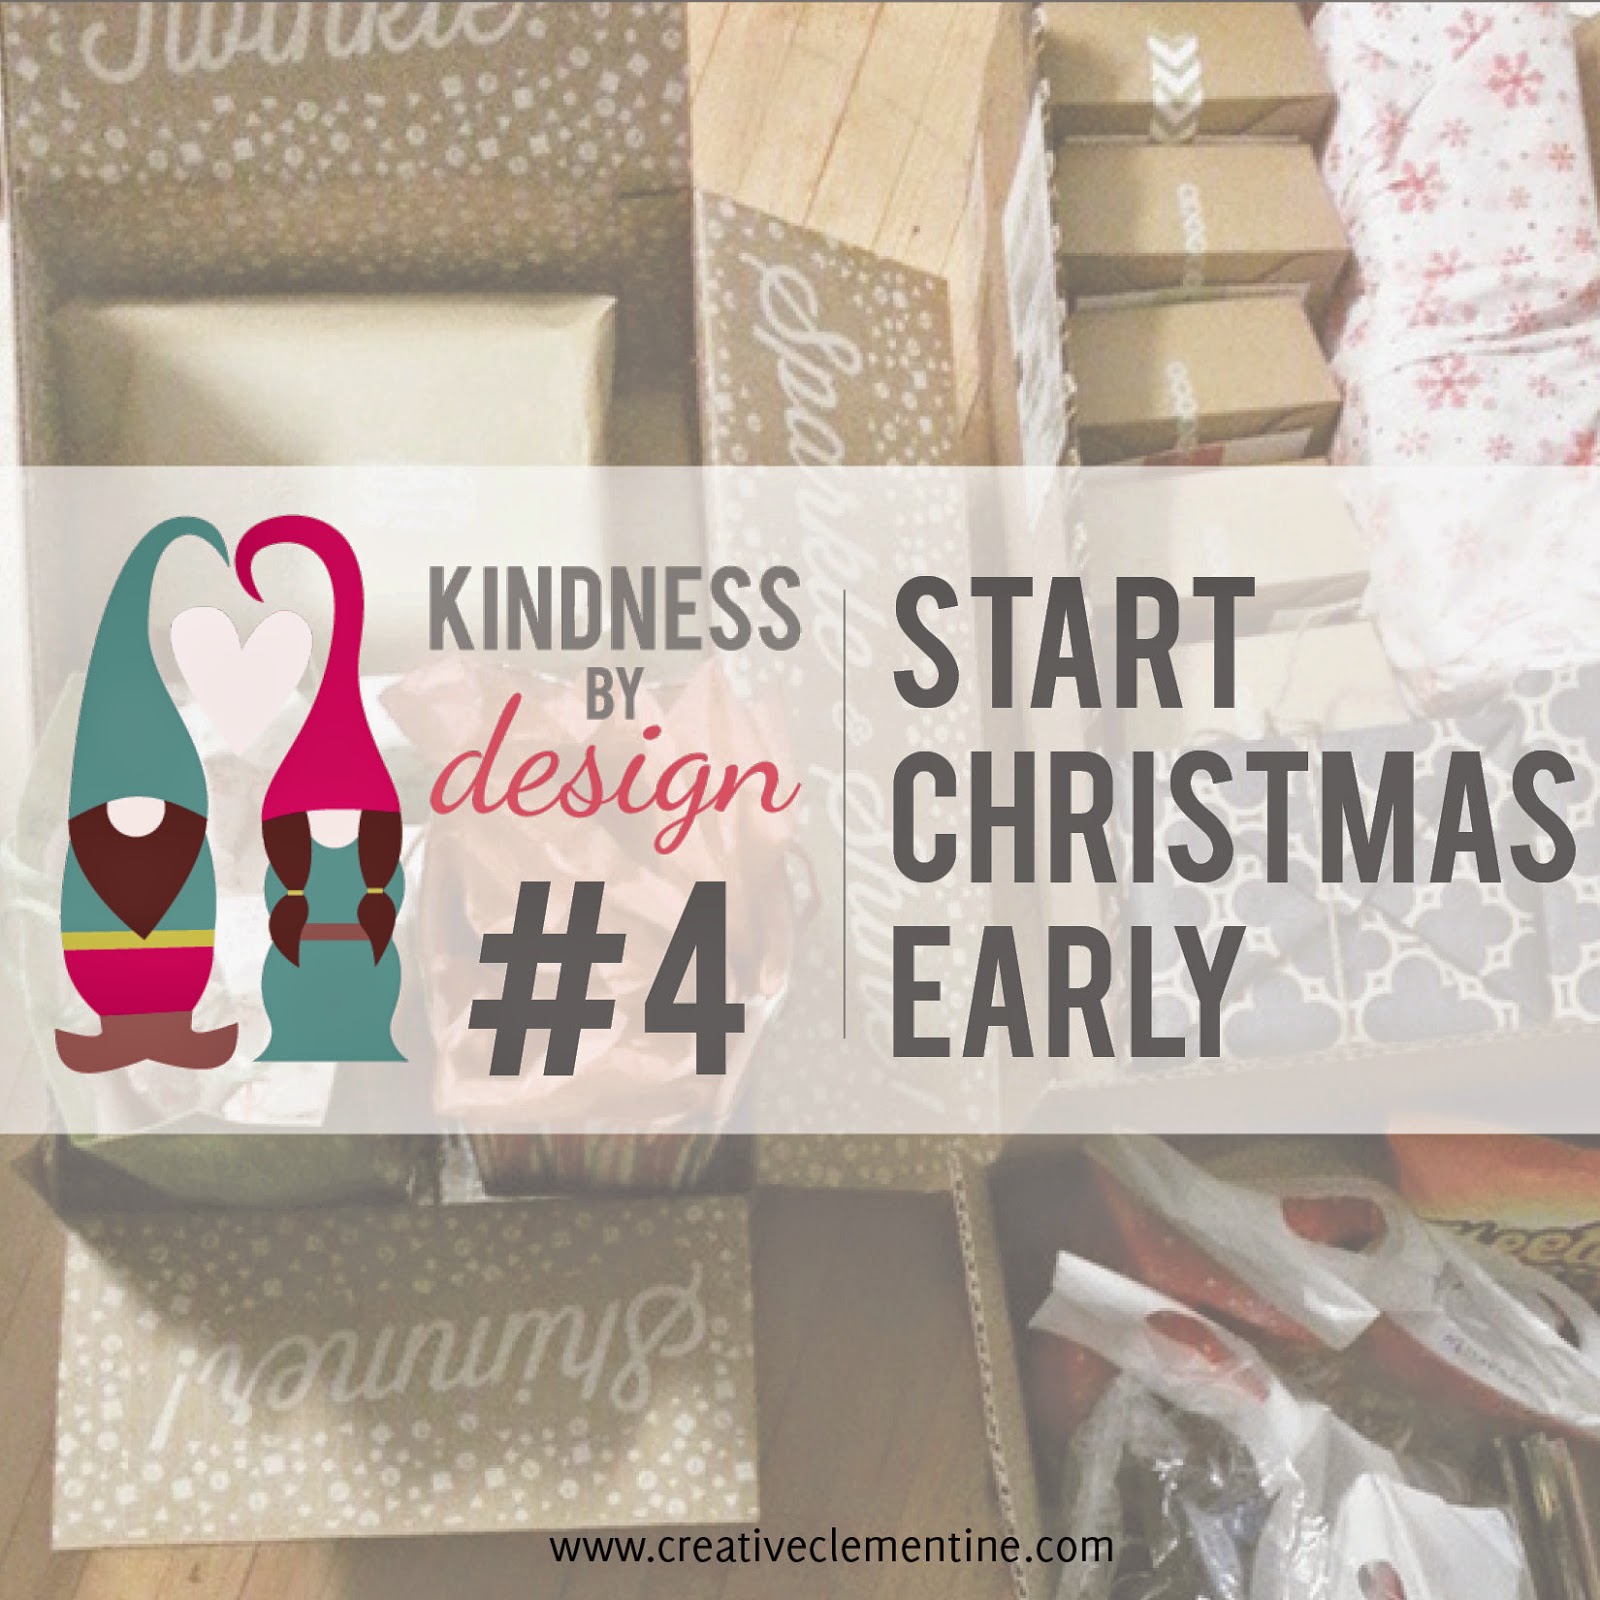 Kindness by Design: planning towards a kinder life. Blog series via CreativeClementine.com